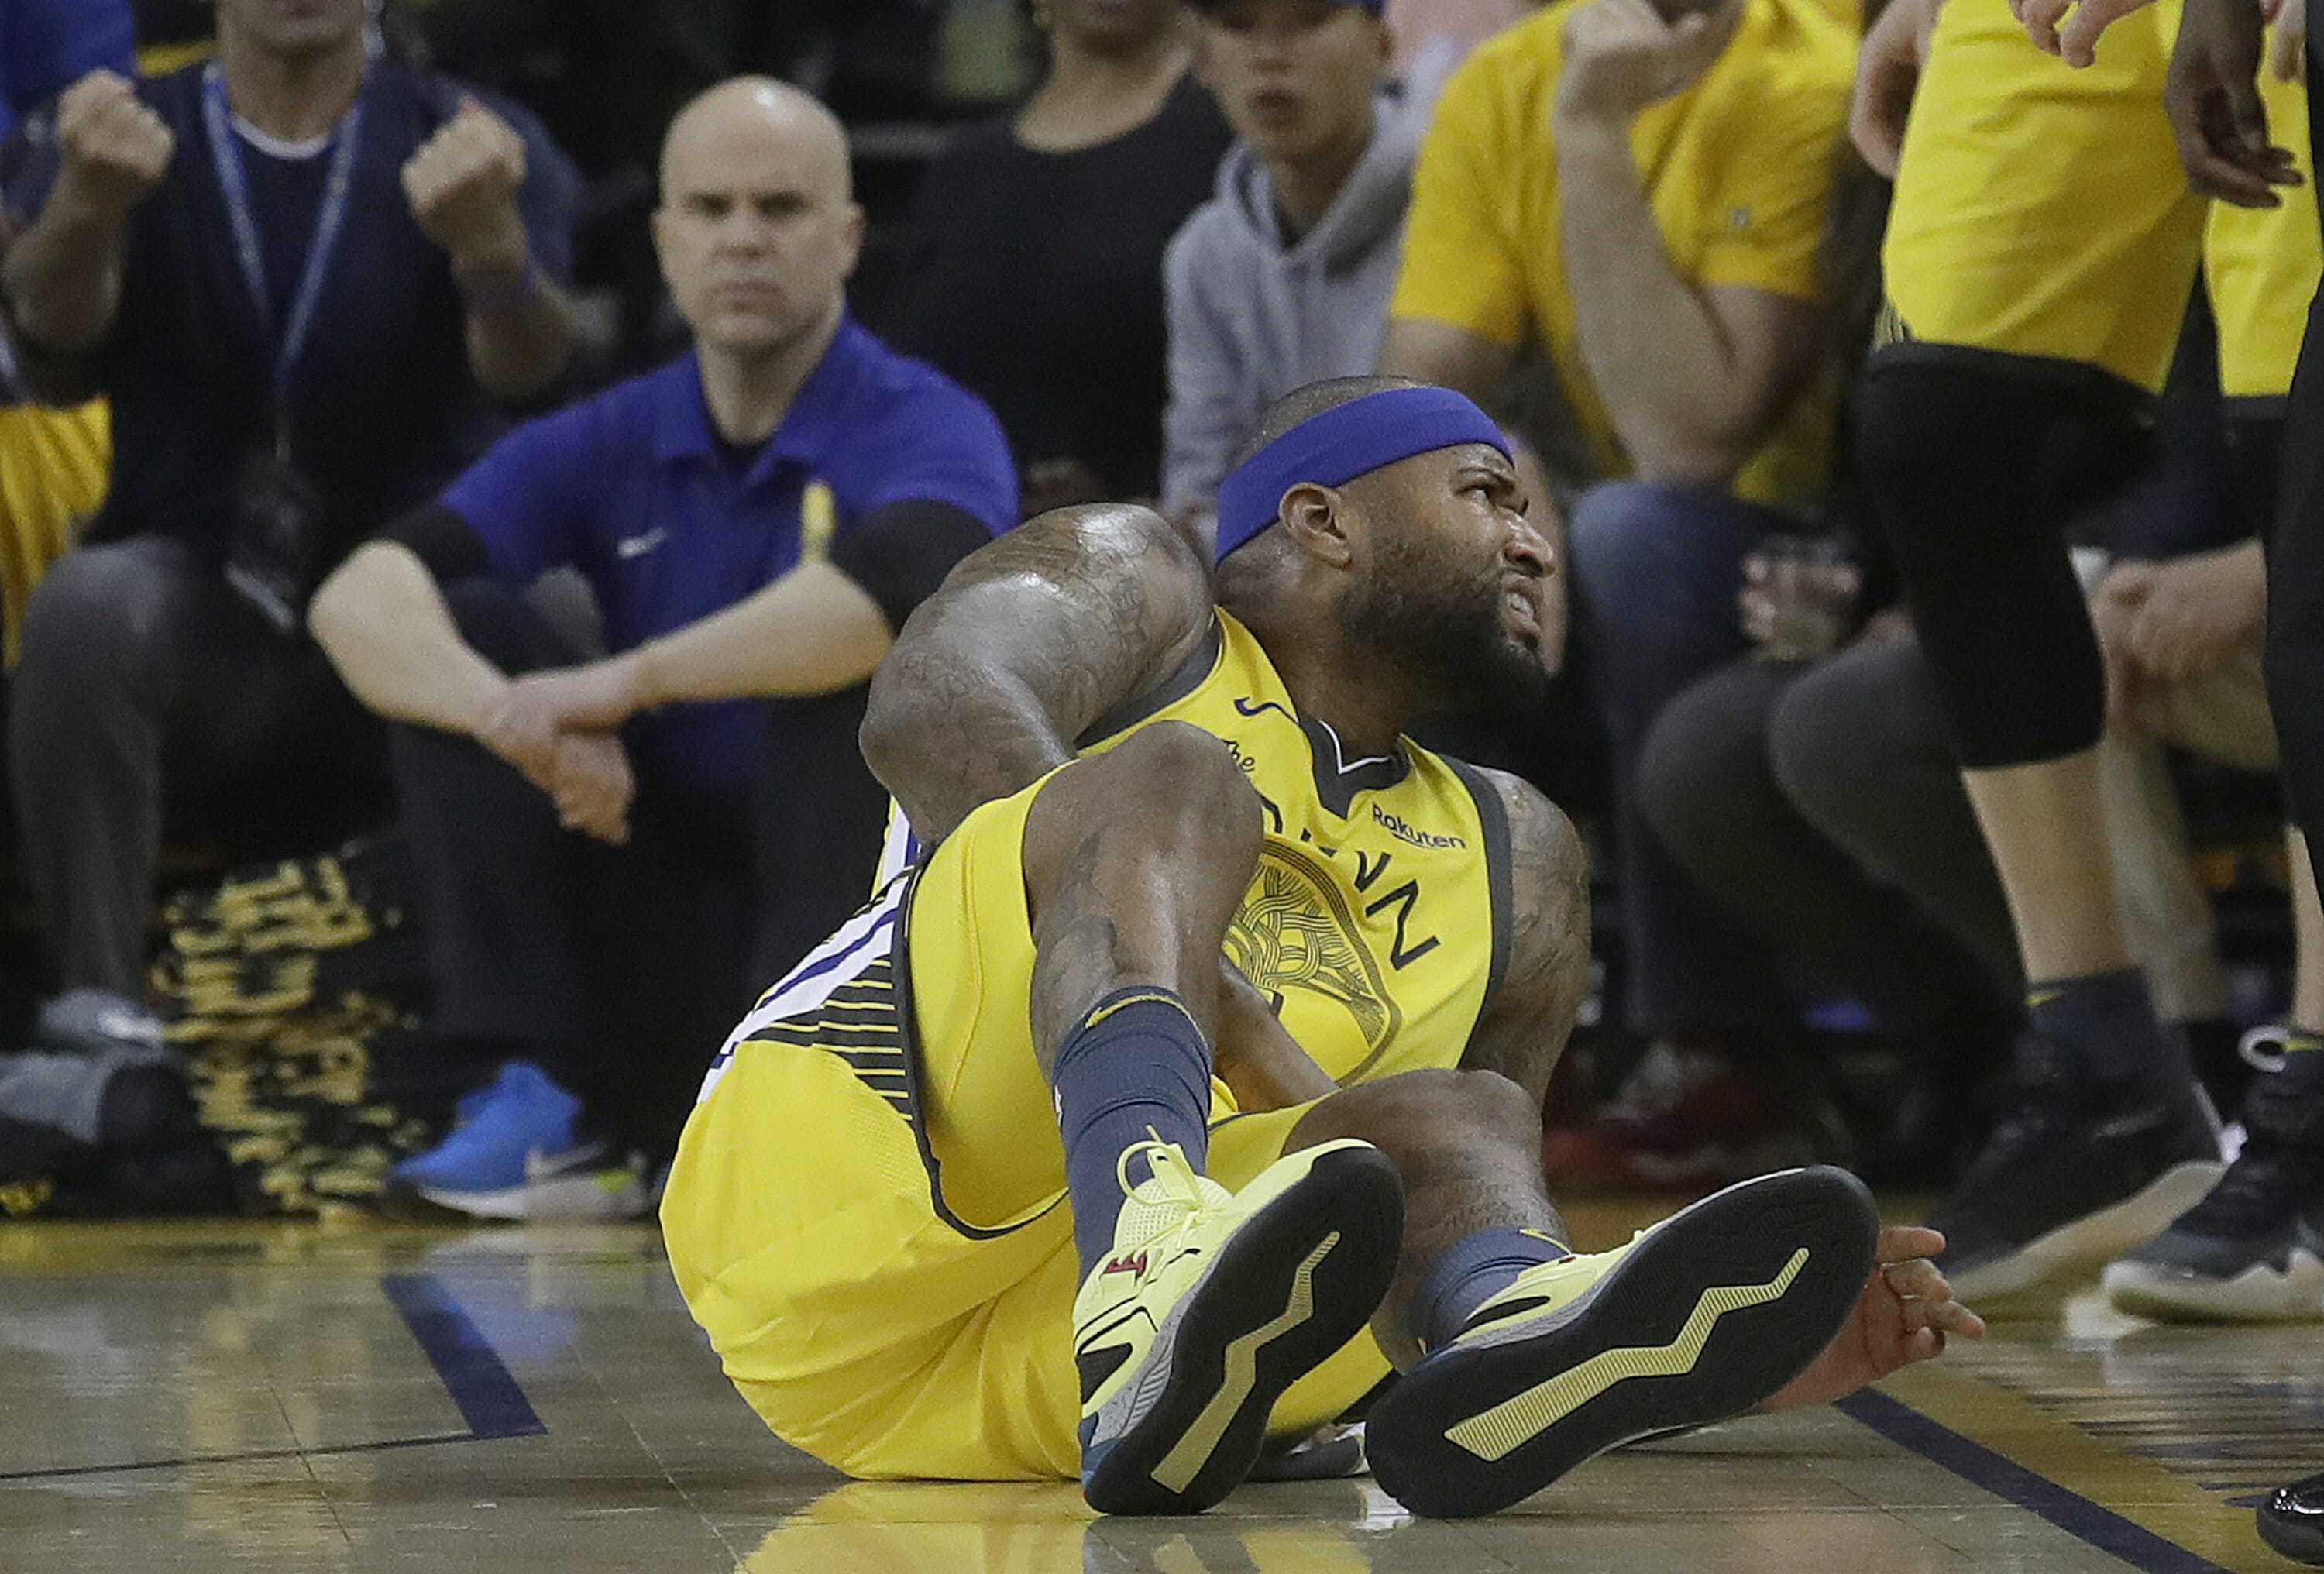 Golden State Warriors center DeMarcus Cousins reacts after falling to the floor during the first half of Game 2 of a first-round NBA basketball playoff series against the Los Angeles Clippers in Oakland, California, Monday, April 15, 2019.